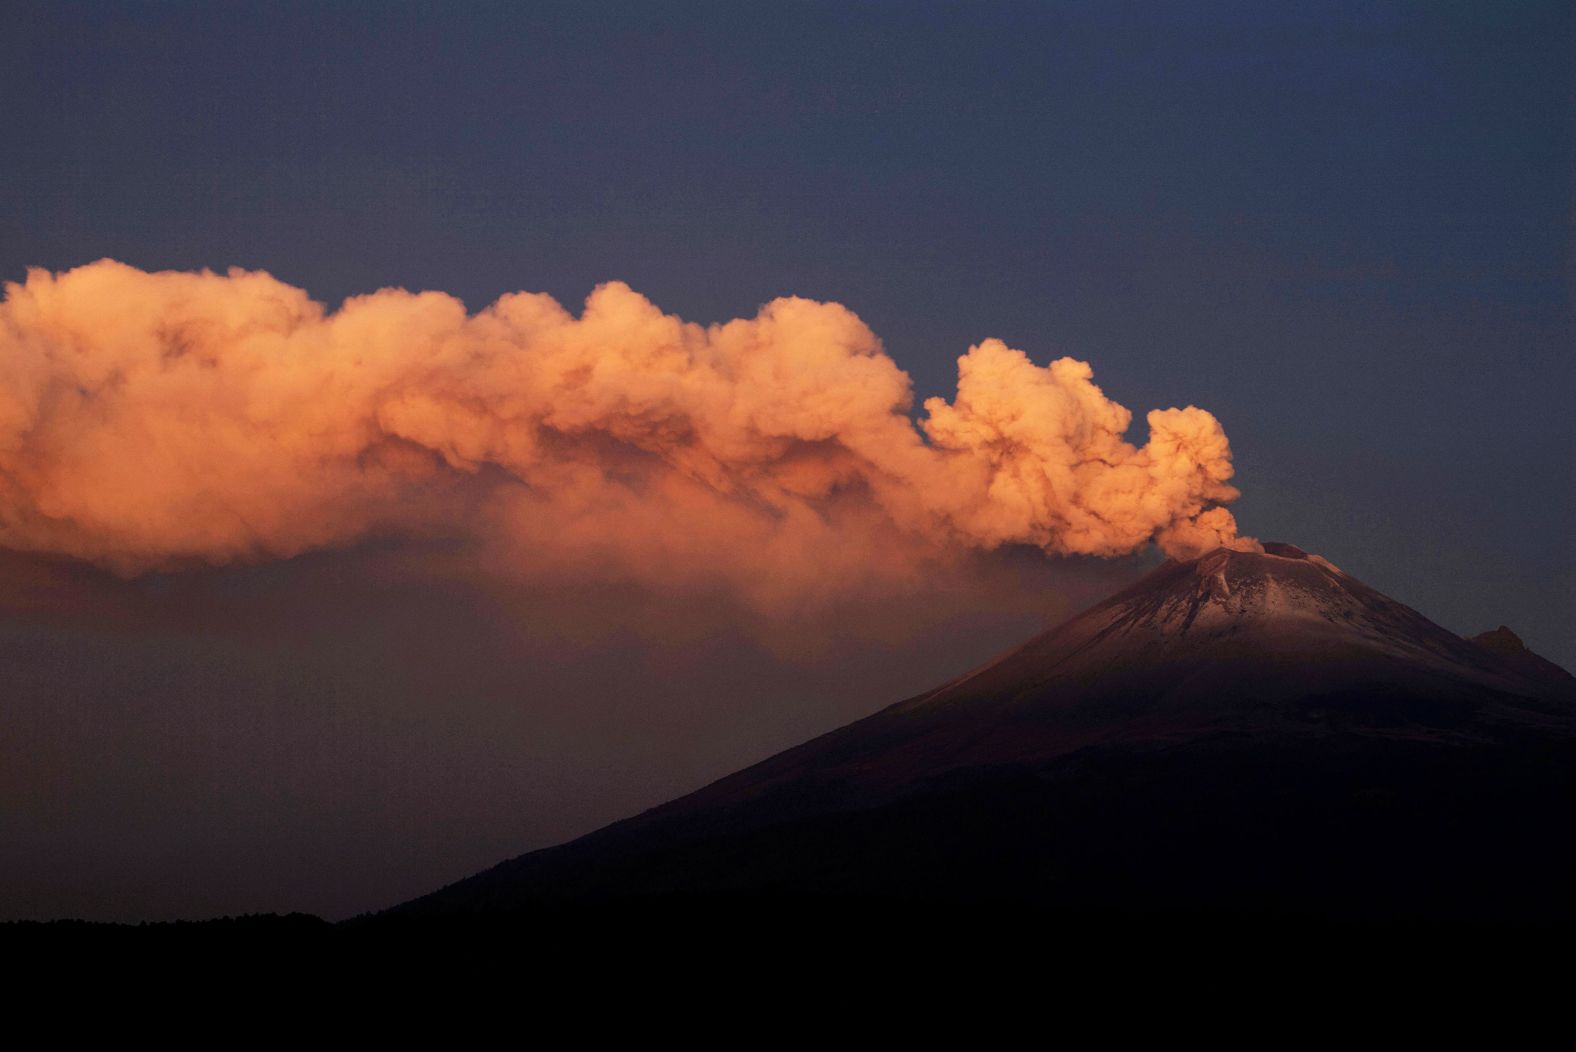 Ash and smoke billow from Mexico's Popocatepetl volcano on Thursday, May 25. The volcano, about 45 miles from Mexico City, <a href="index.php?page=&url=https%3A%2F%2Fwww.cnn.com%2F2023%2F05%2F22%2Famericas%2Fmexico-volcano-popocatepetl-latam-intl%2Findex.html" target="_blank">has been spewing ash into several nearby towns</a> since last week, according to authorities.